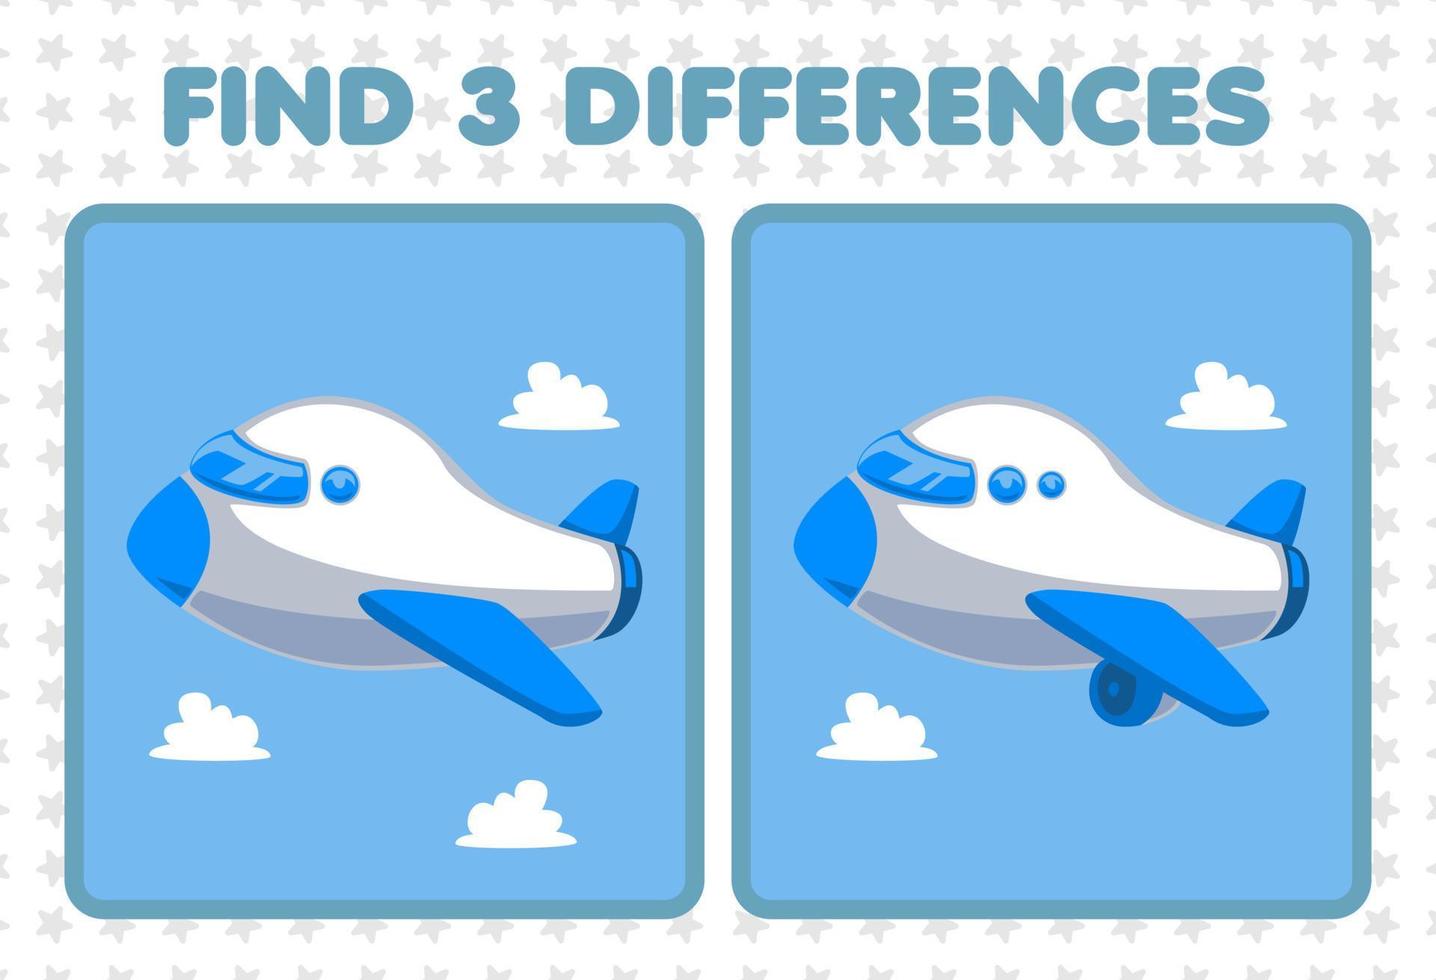 Education game for children find three differences between two cute transportation plane vector